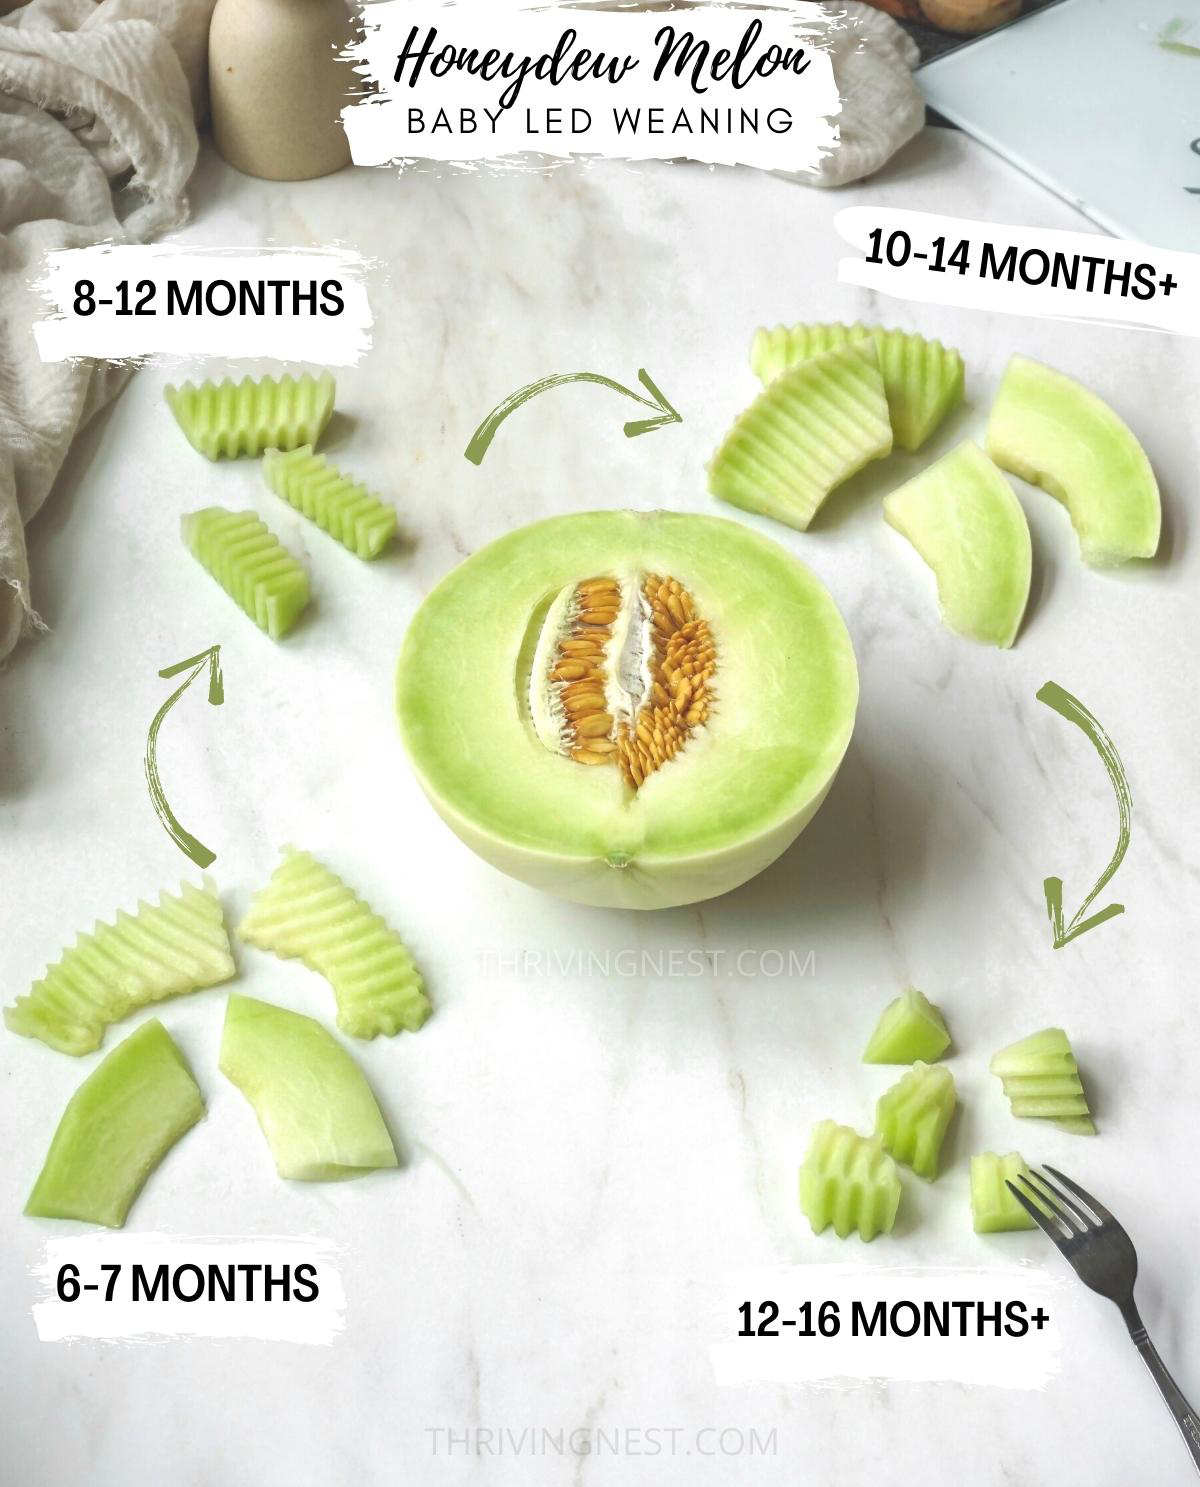 How to cut honeydew melon for babies (baby led weaning) how to serve melon to baby. #melon #babyledweaning